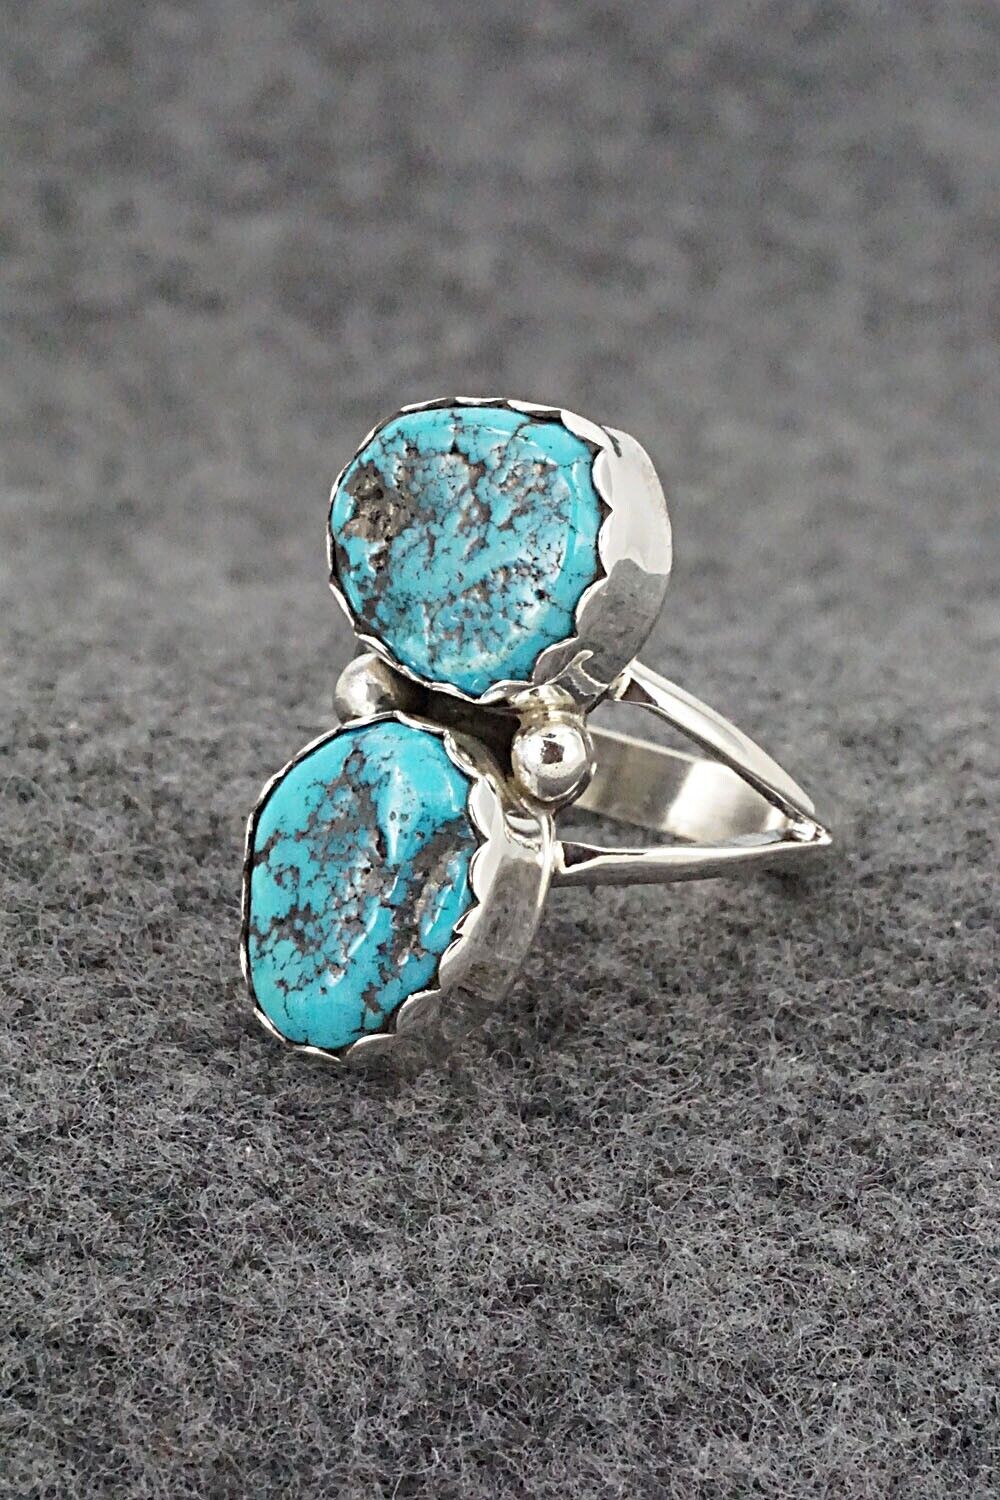 Turquoise & Sterling Silver Ring - Pearlene Spencer - Size 7.5